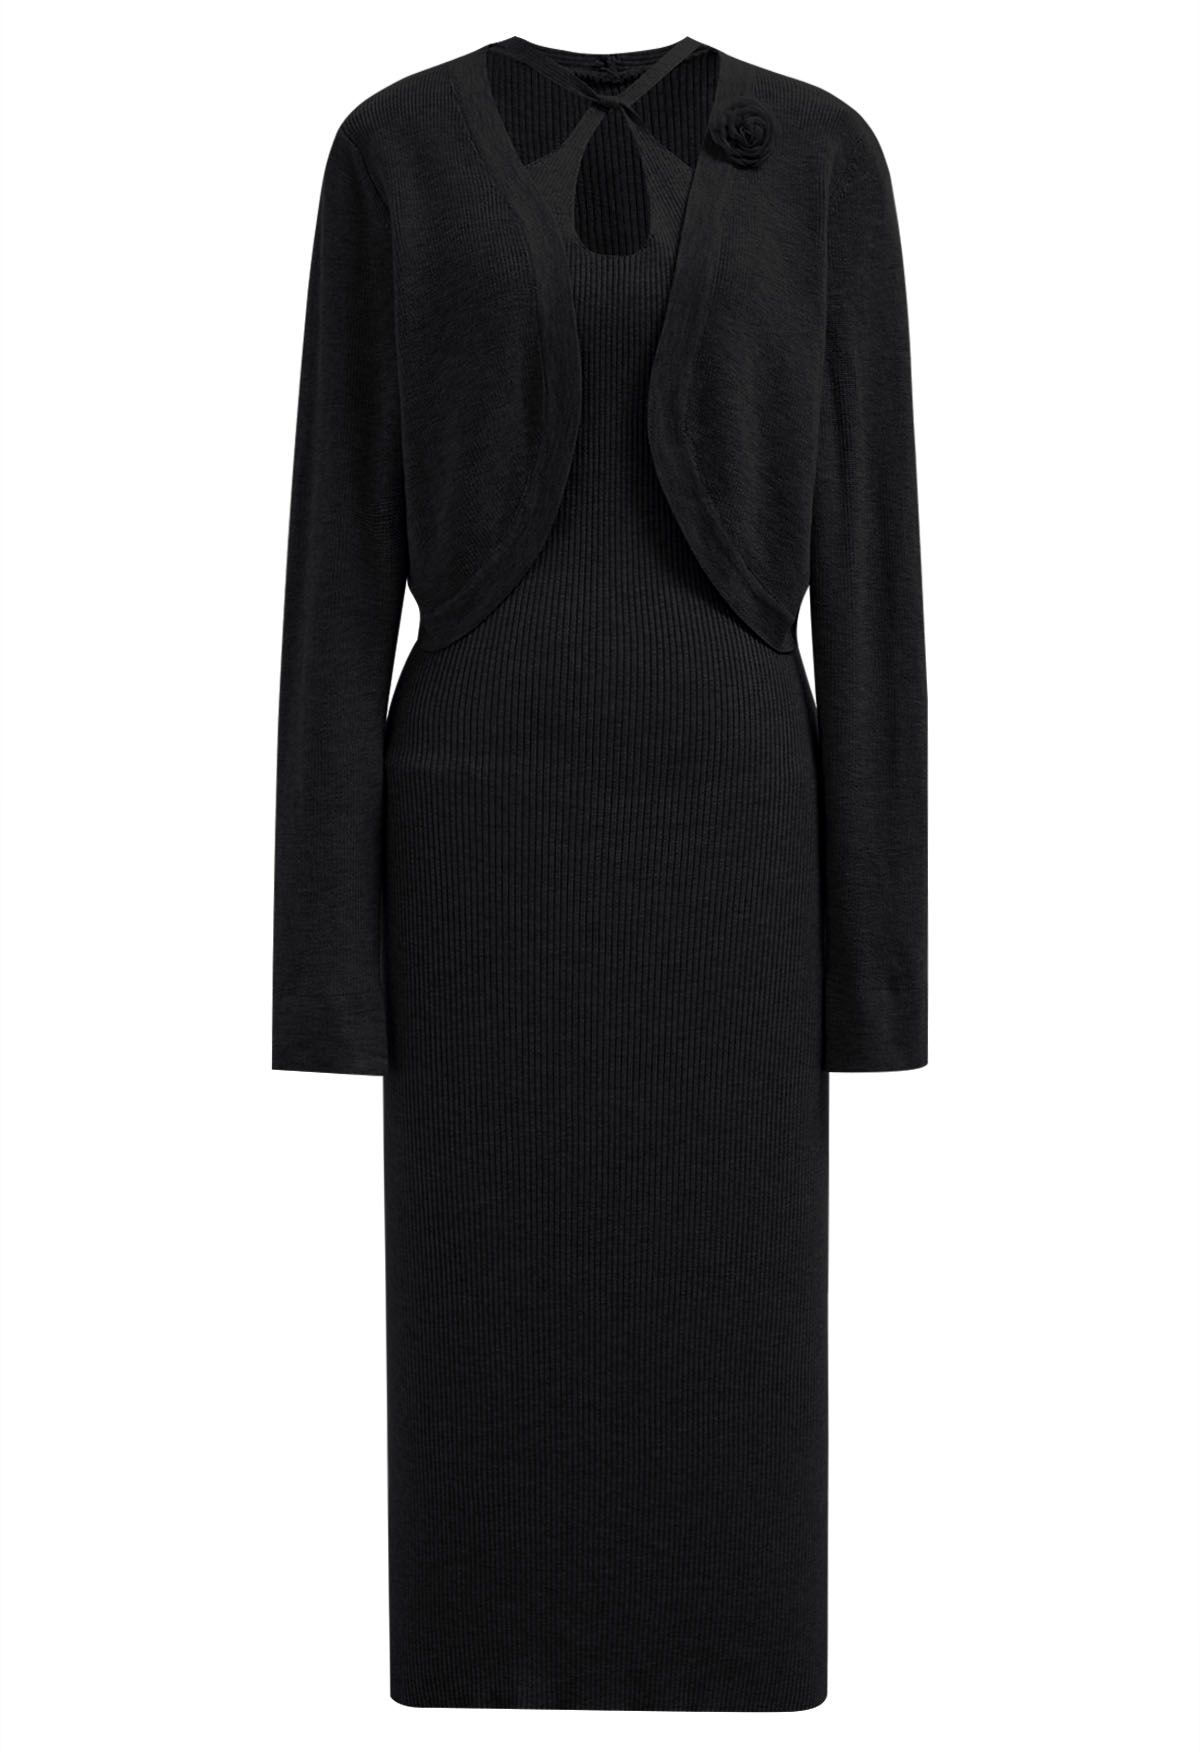 Cutout Halter Neck Knit Dress and Cardigan Set in Black